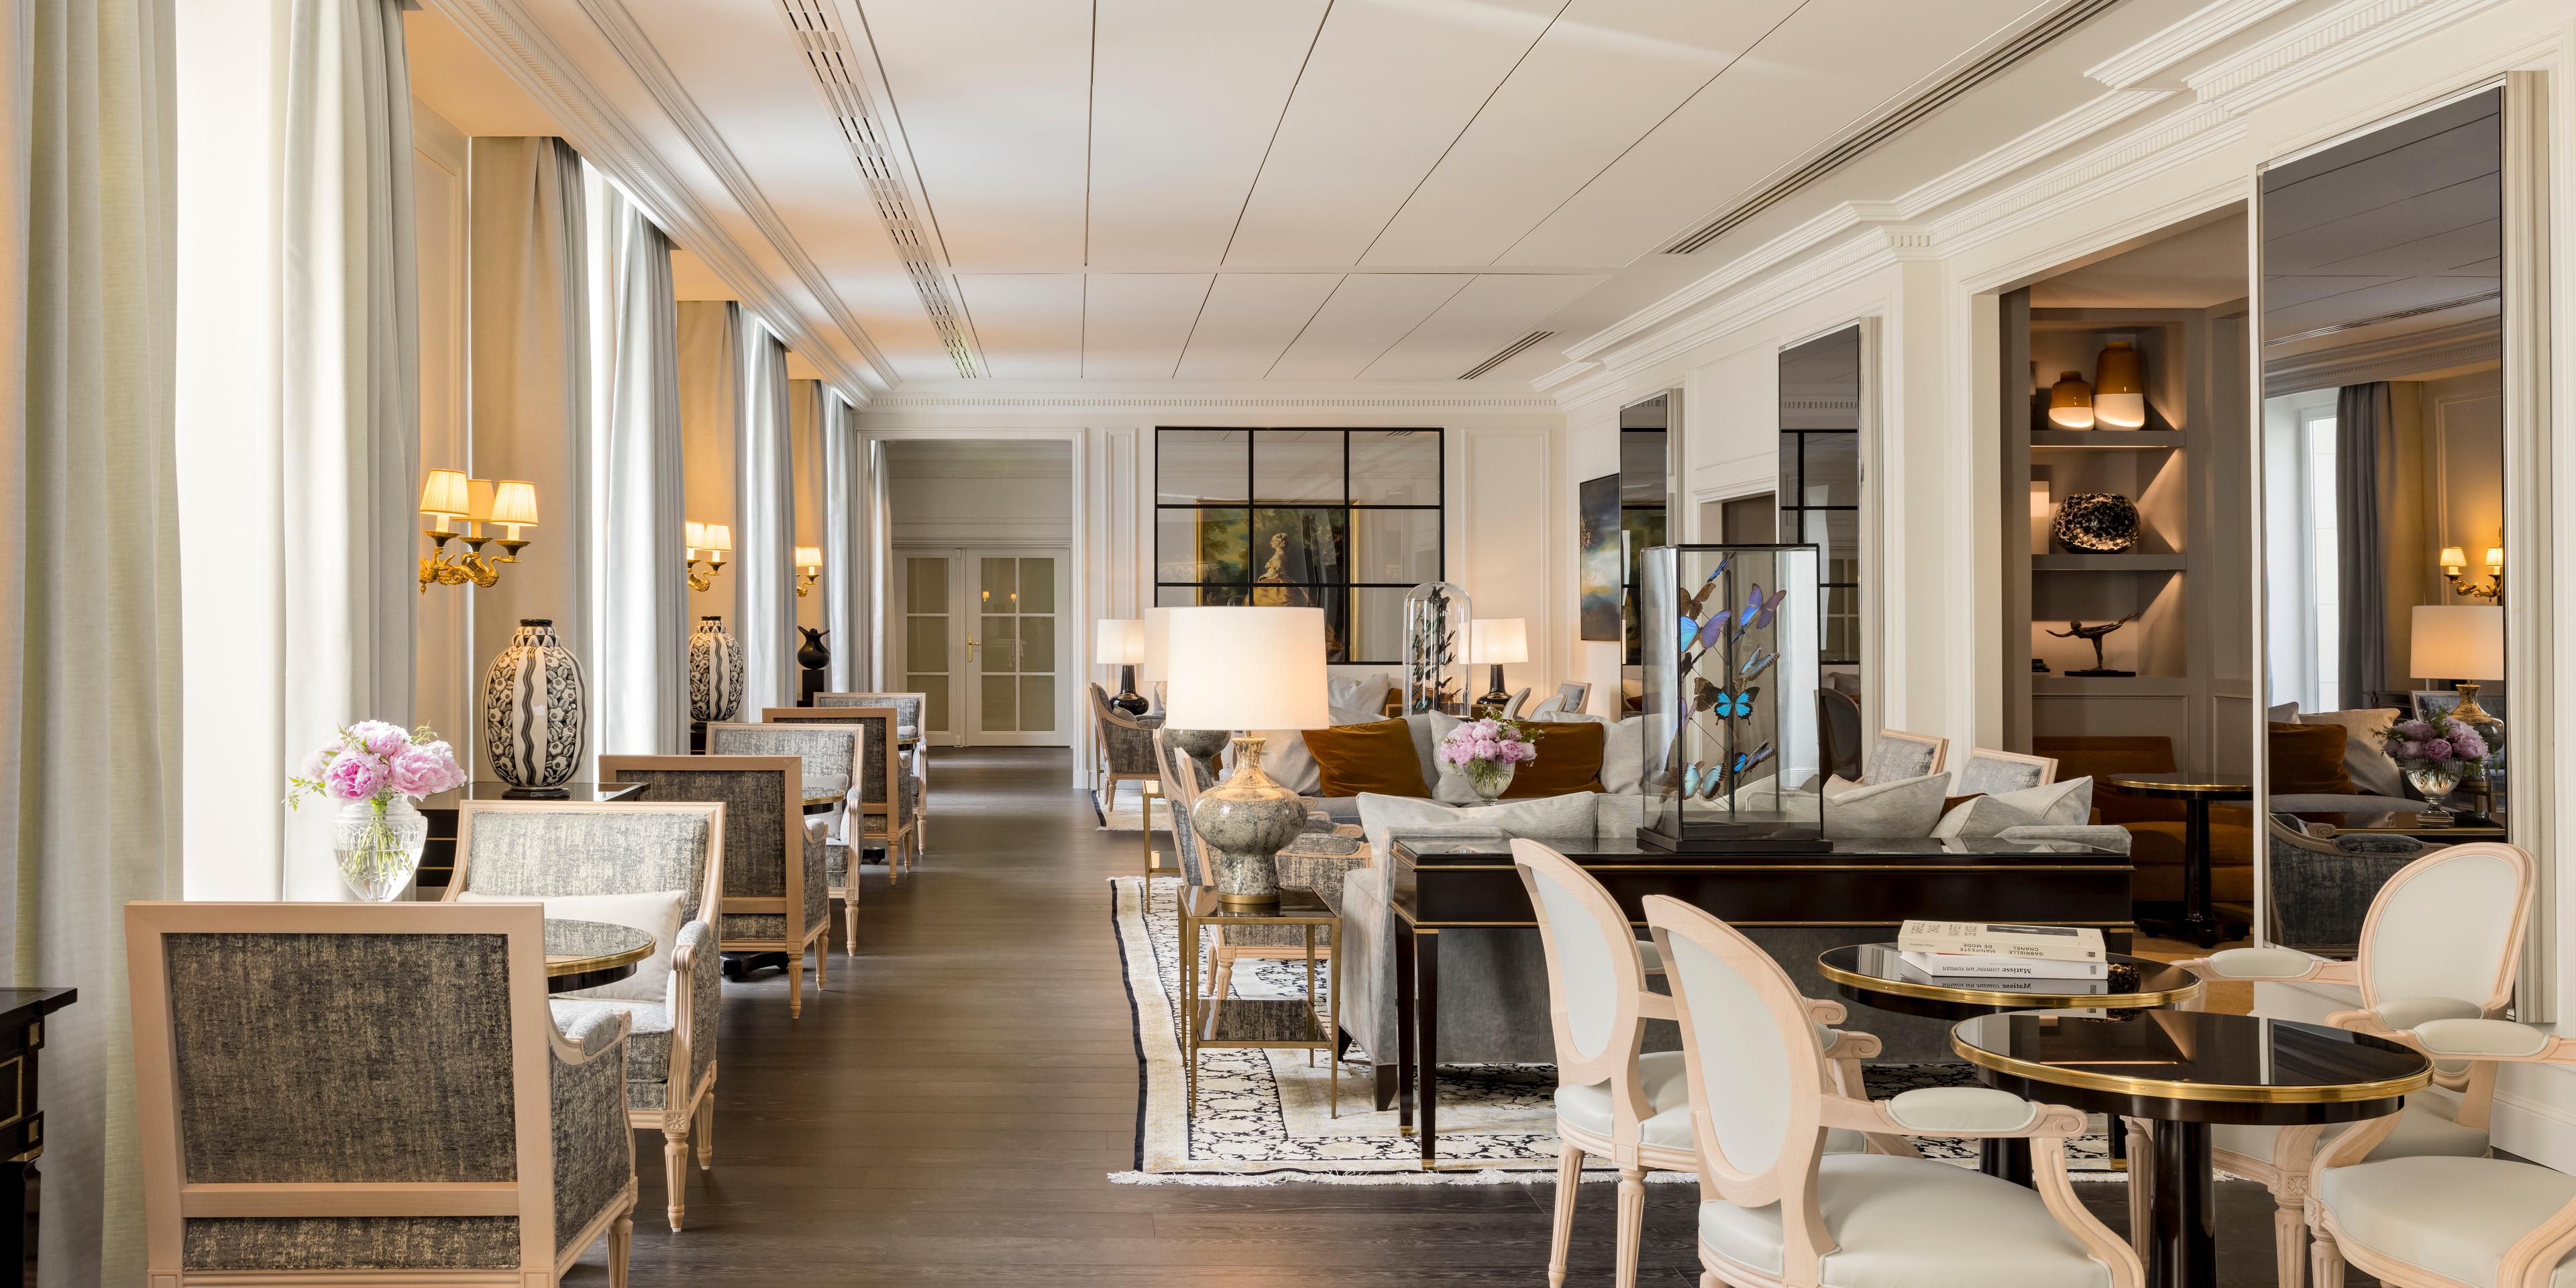 The Club Lounge combines personal touches with exclusive privileges and signature moments to make your stay even more exceptional. InterContinental Paris Le Grand is inaugurating its new fully renovated Club Lounge for a refined and intimate experience.